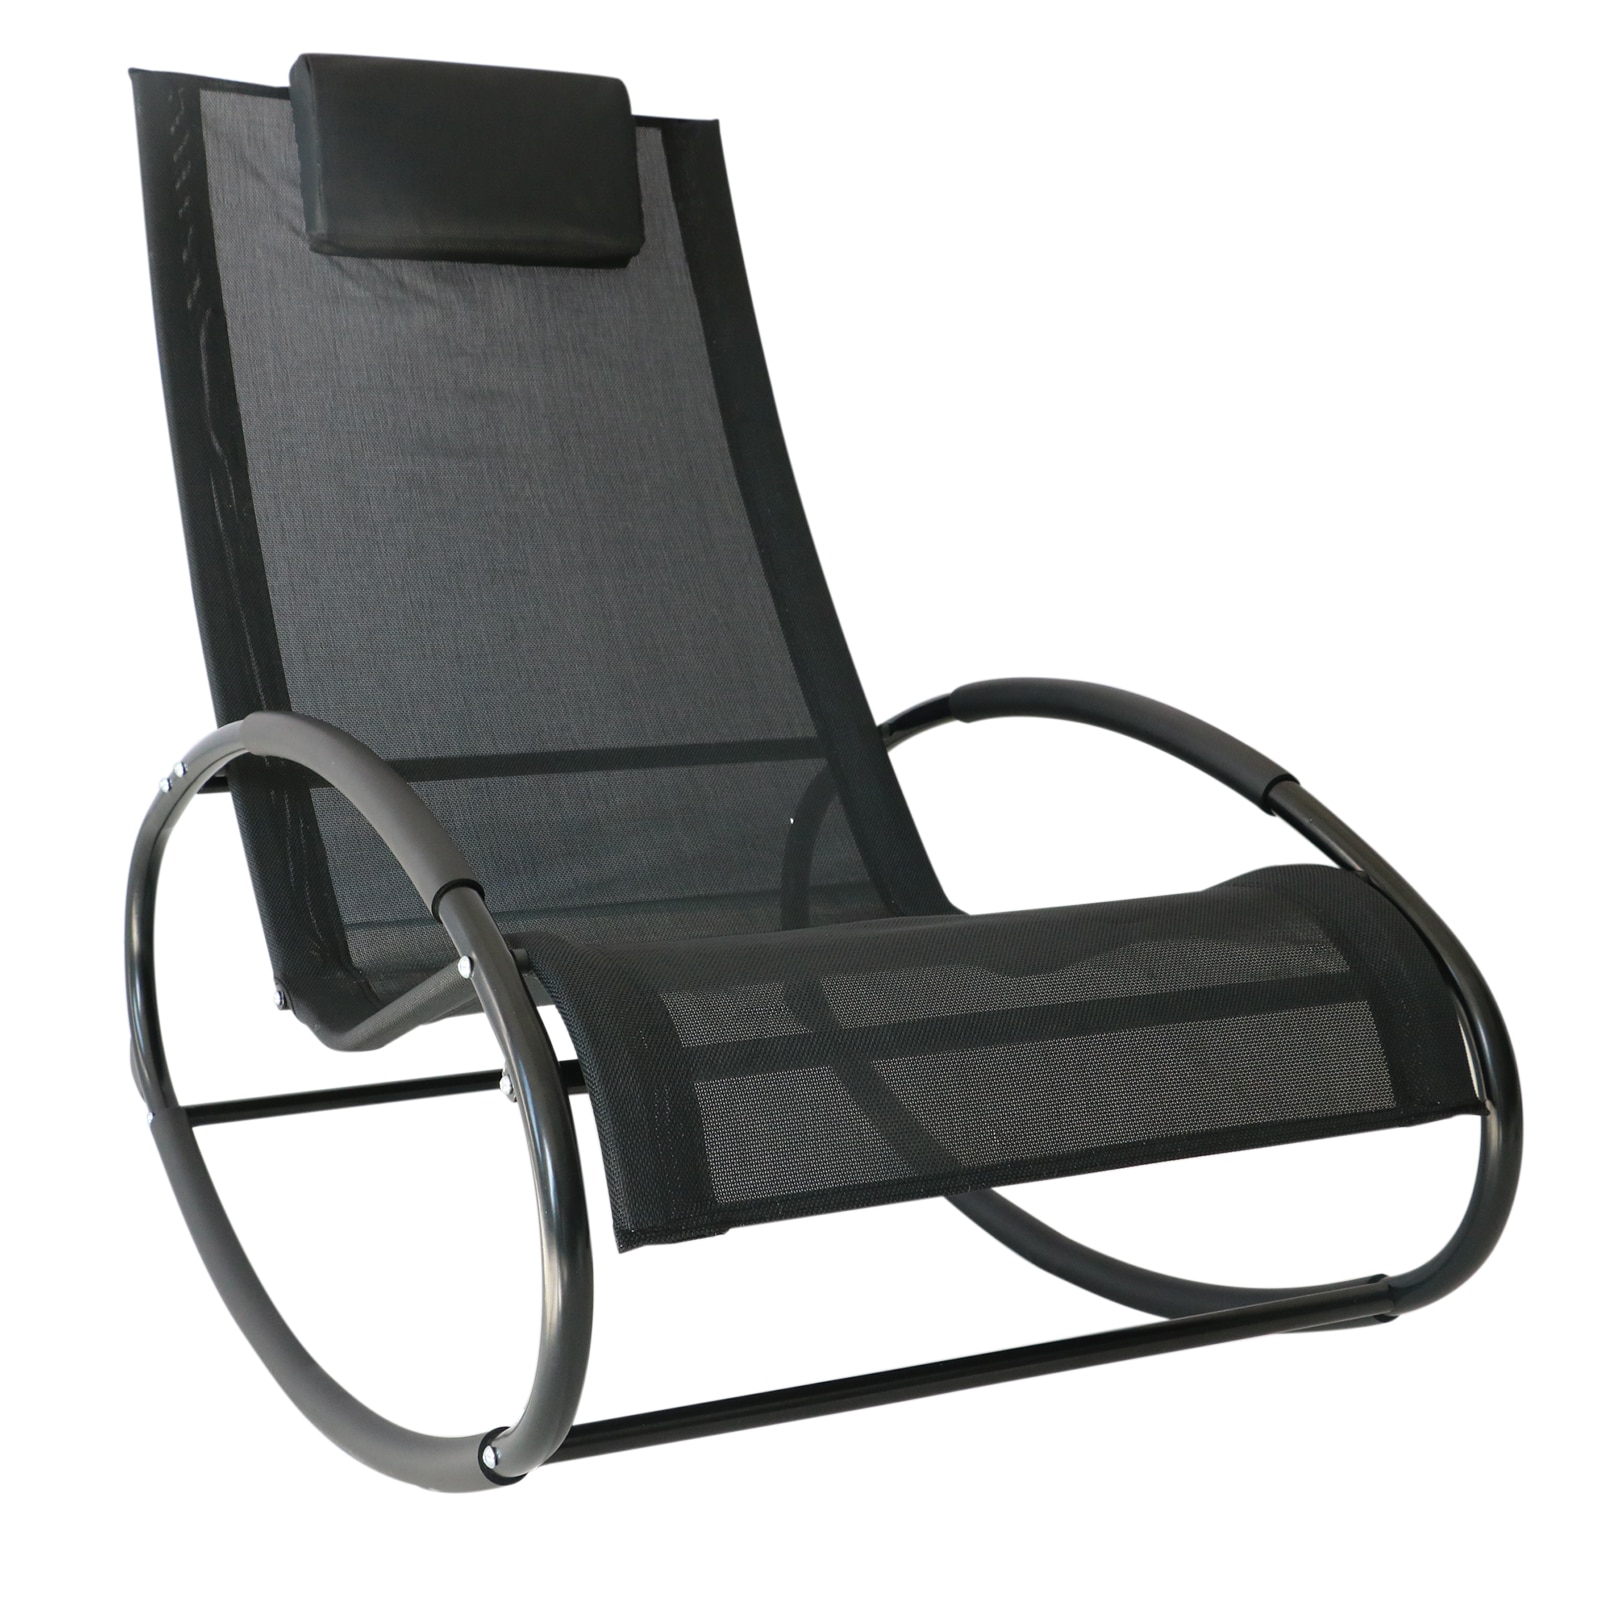 Clearance Sale Outsunny Breathable Mesh Rocking Chair for Outdoor Recliner Seat